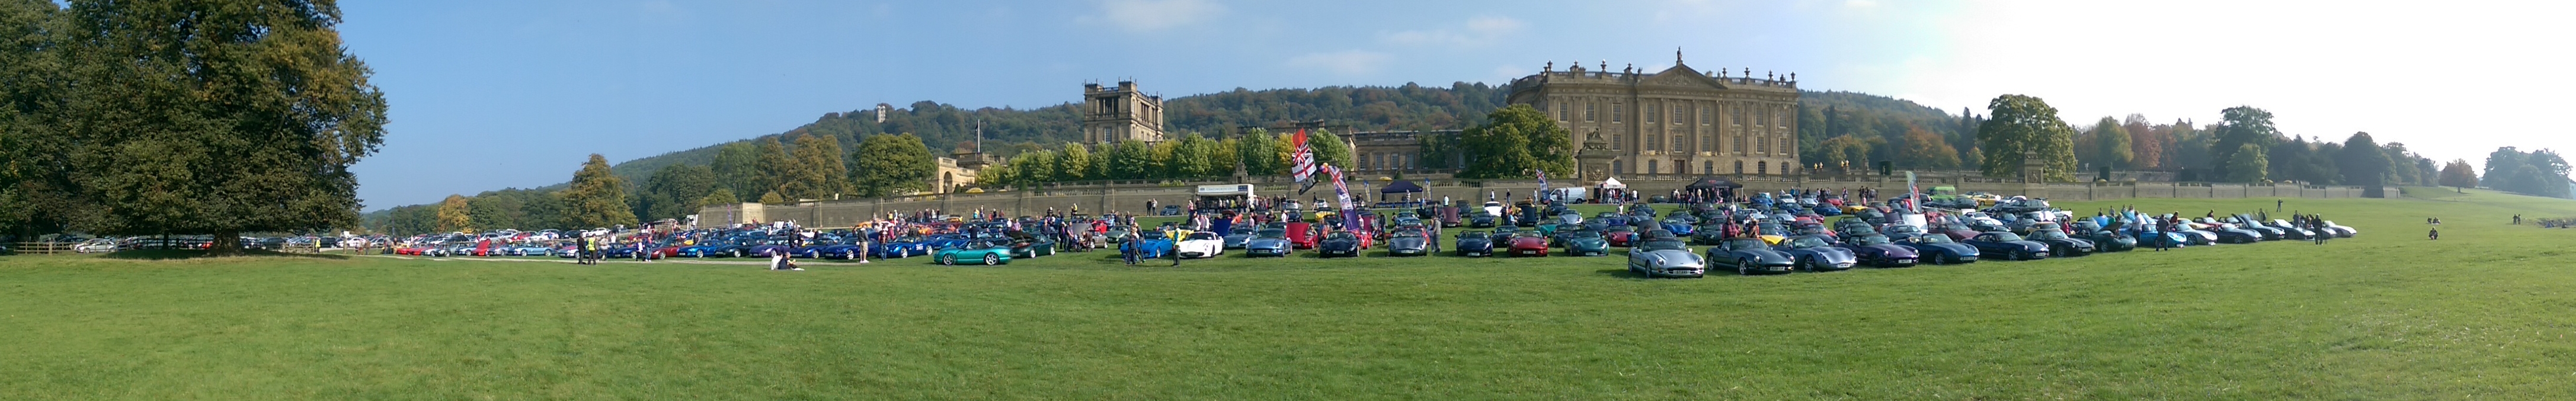 TVR's at Chatsworth - Page 4 - TVR Events & Meetings - PistonHeads